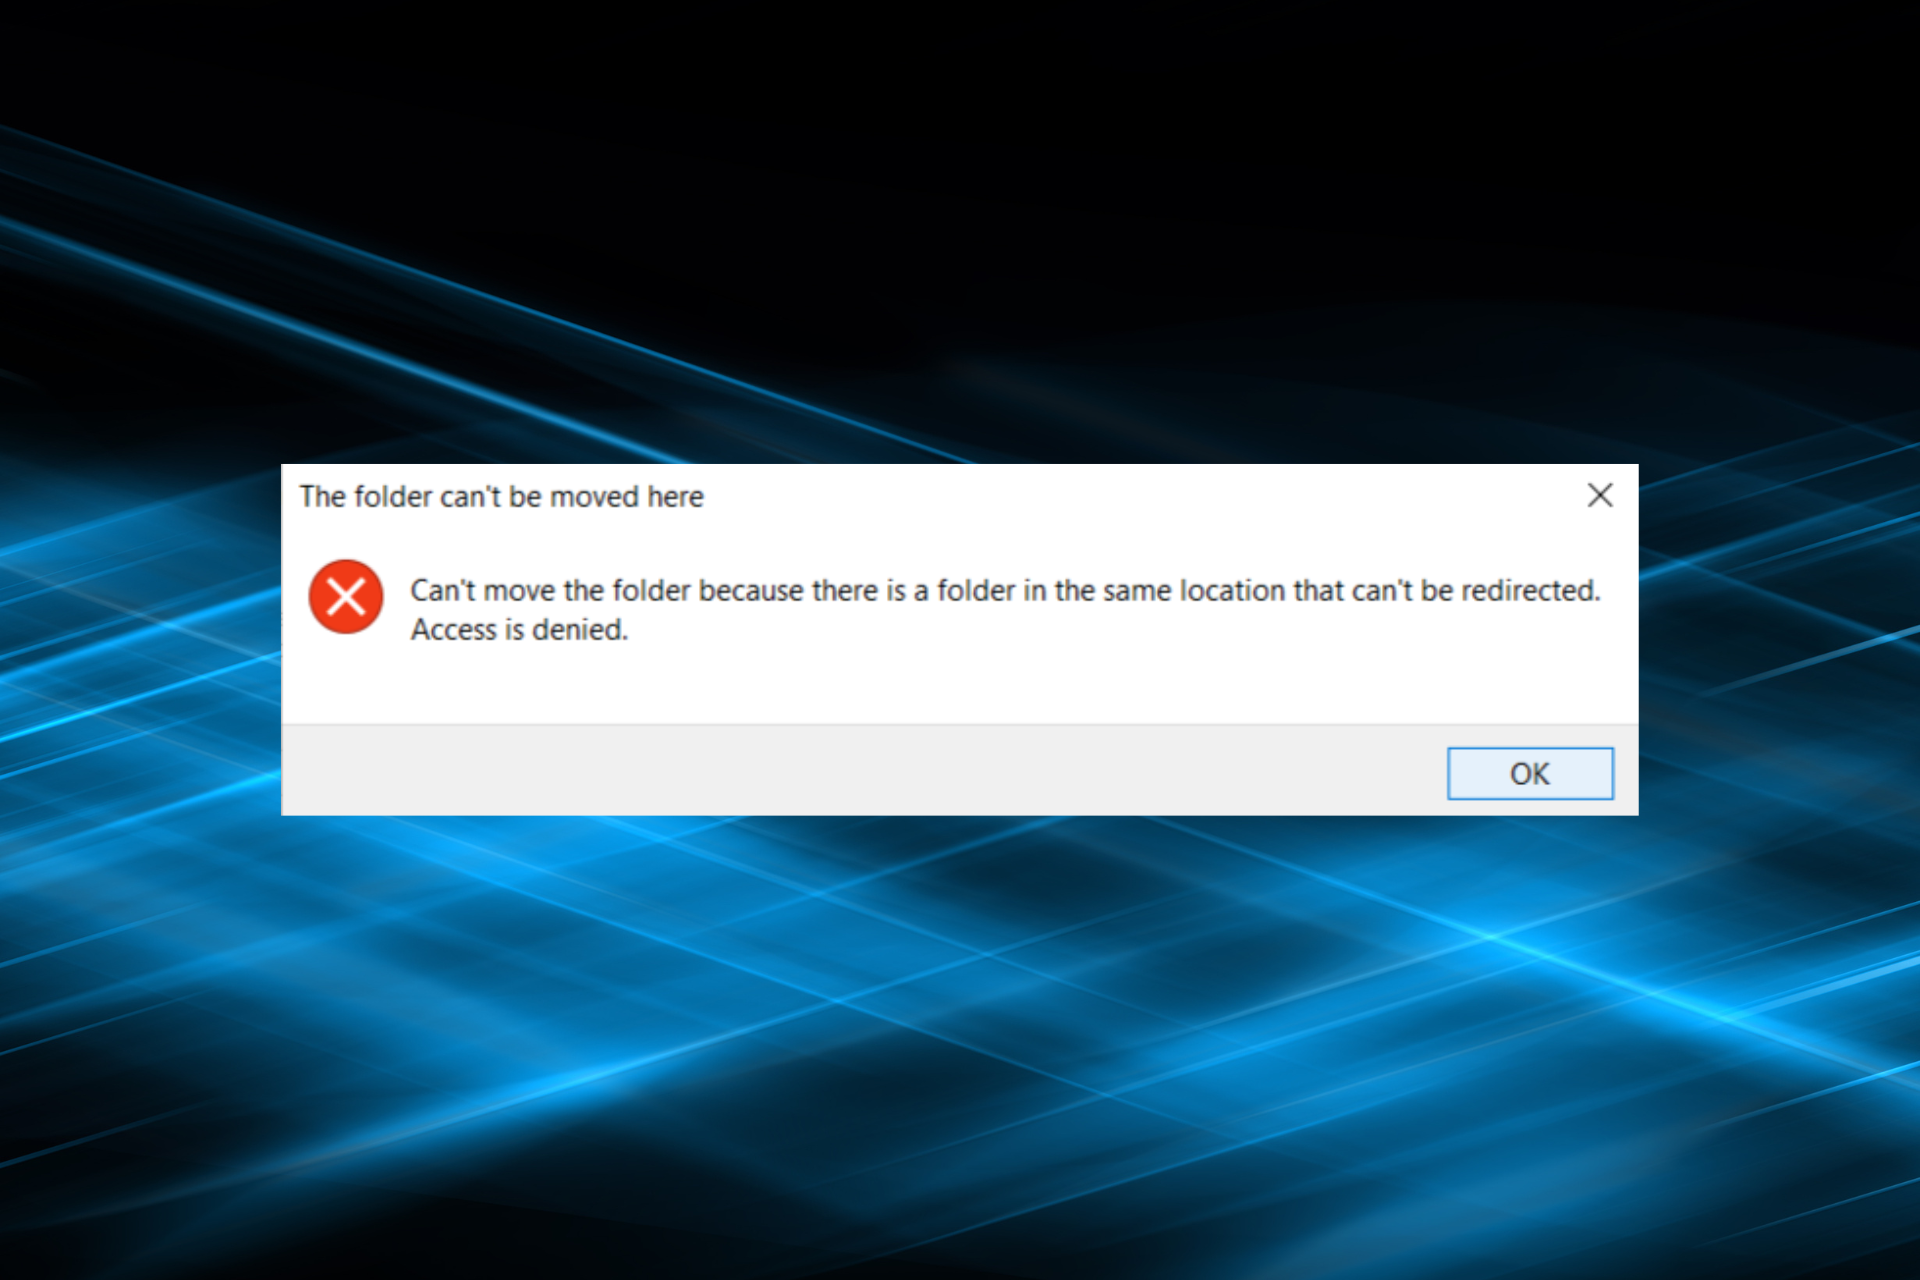 fix can't move the folder because there is a folder in the same location error in Windows